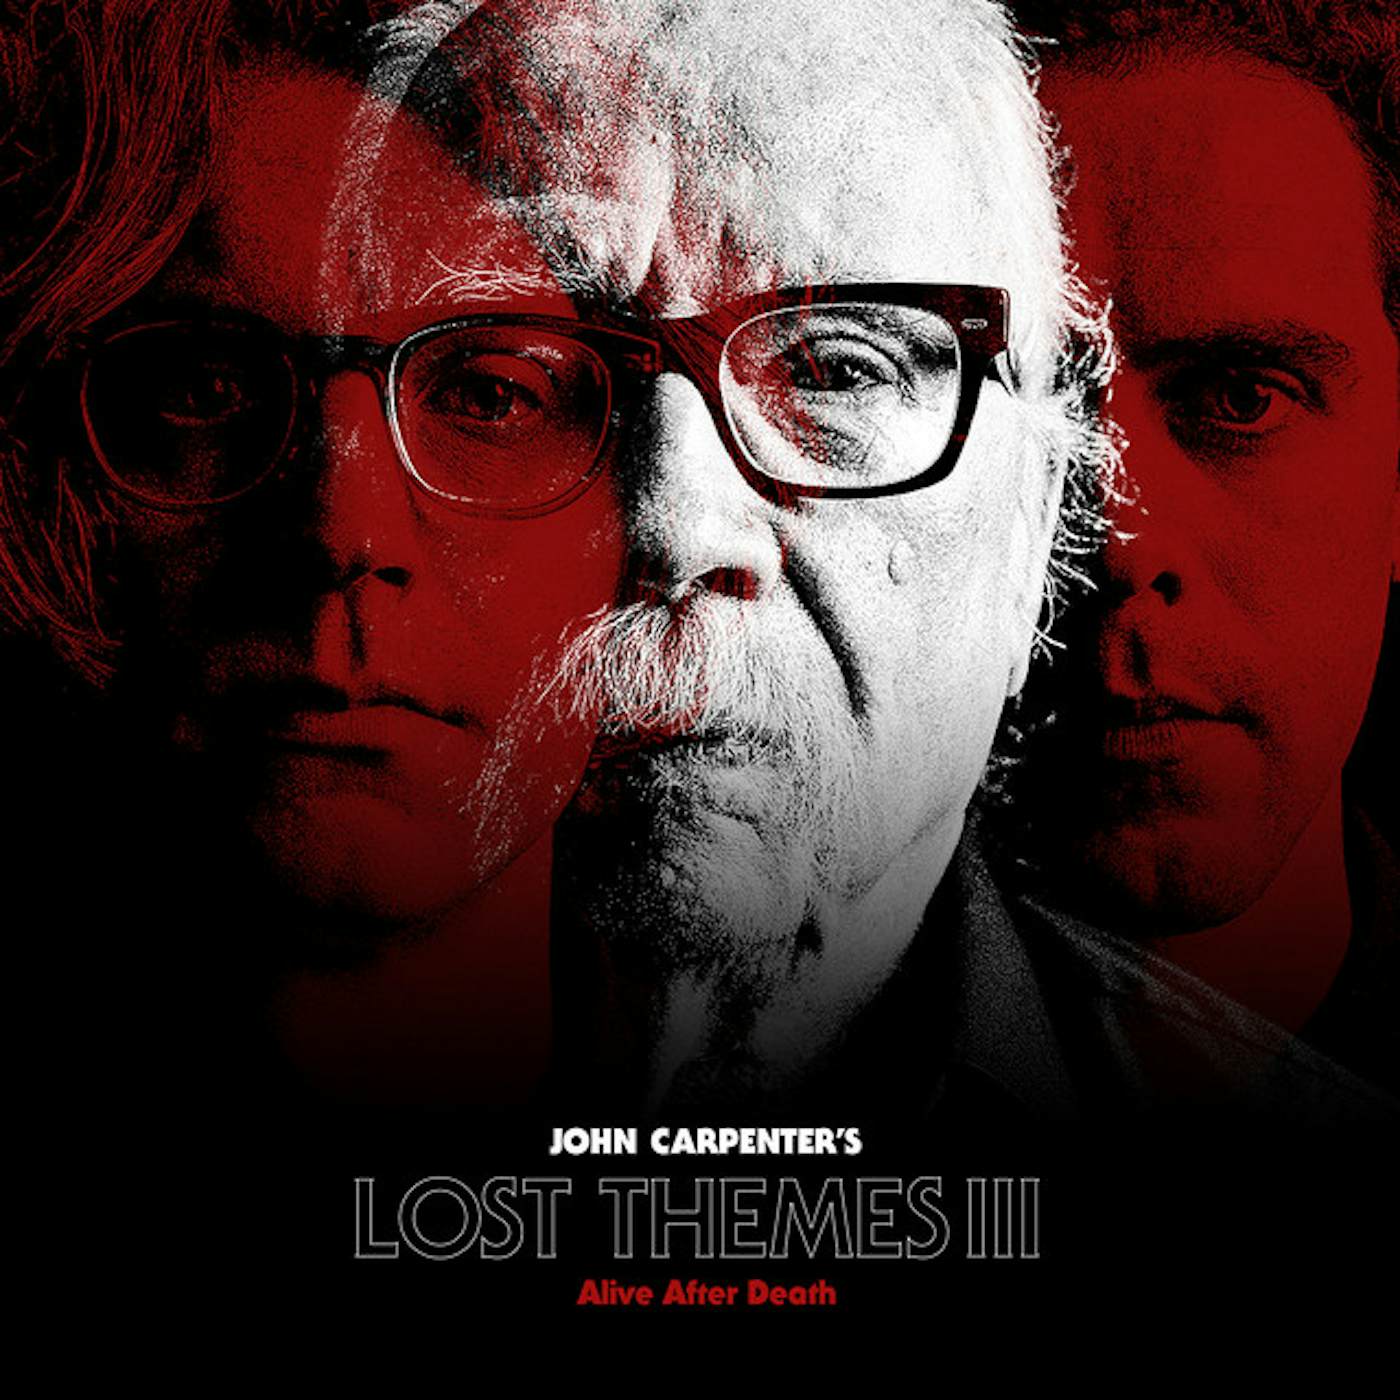 John Carpenter LOST THEMES III: ALIVE AFTER DEATH CD